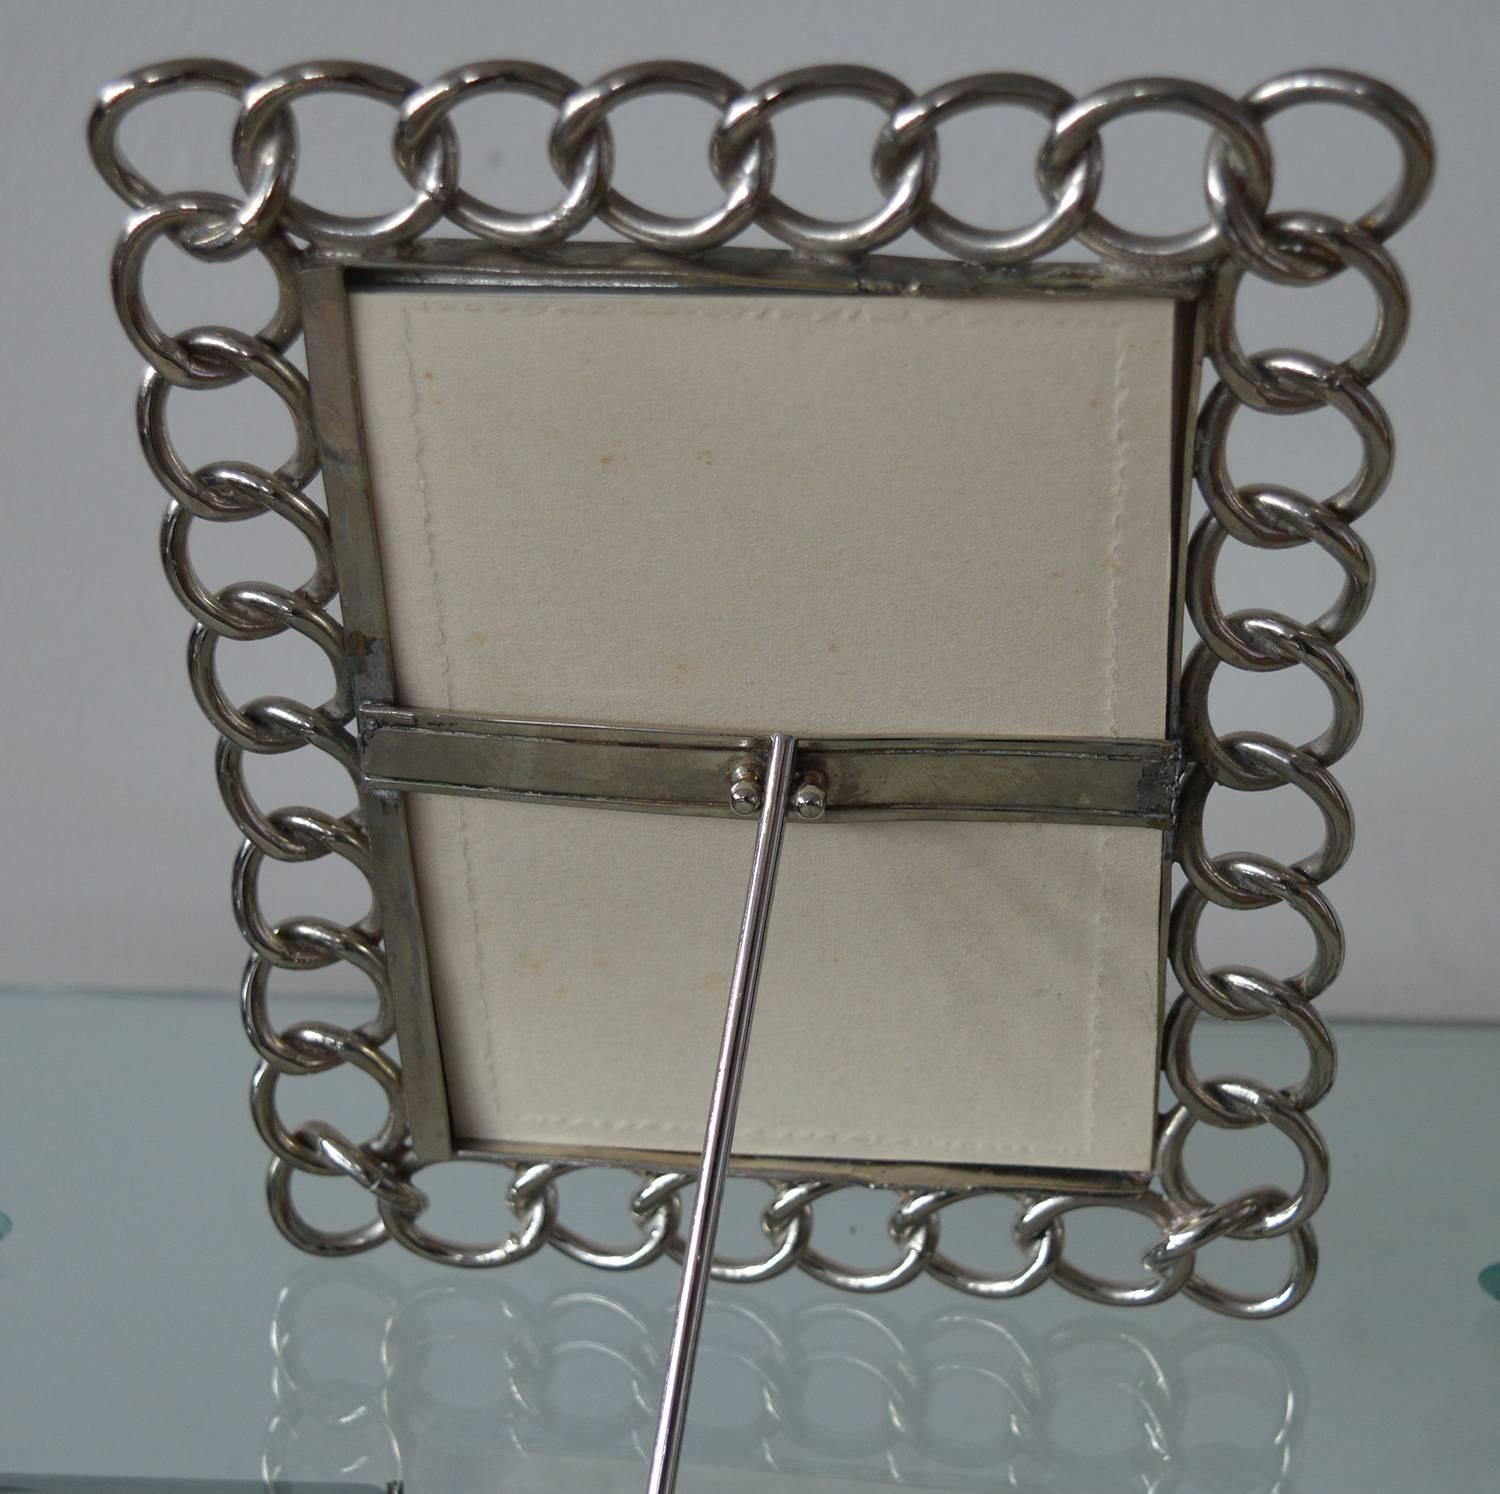 Edwardian Antique Nickel-Plated Brass Ring Photograph Frame